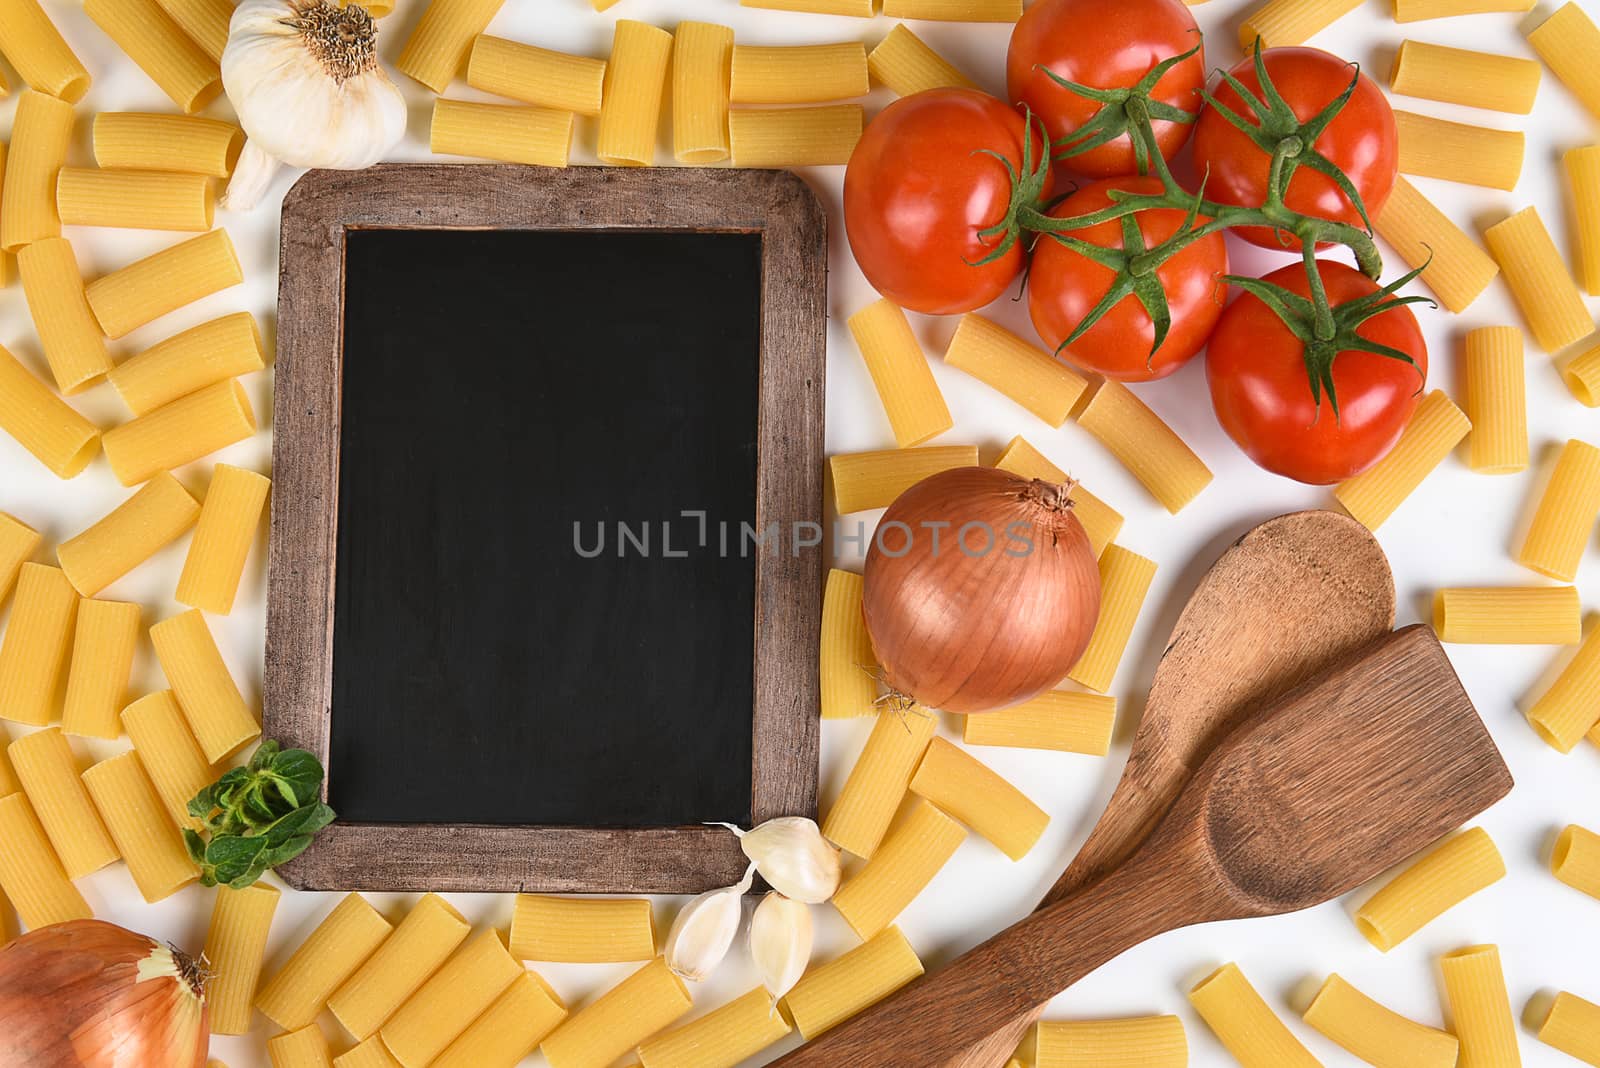 Top view of a blank chalkboard with the ingredients for an Italian meal. Horizontal format.